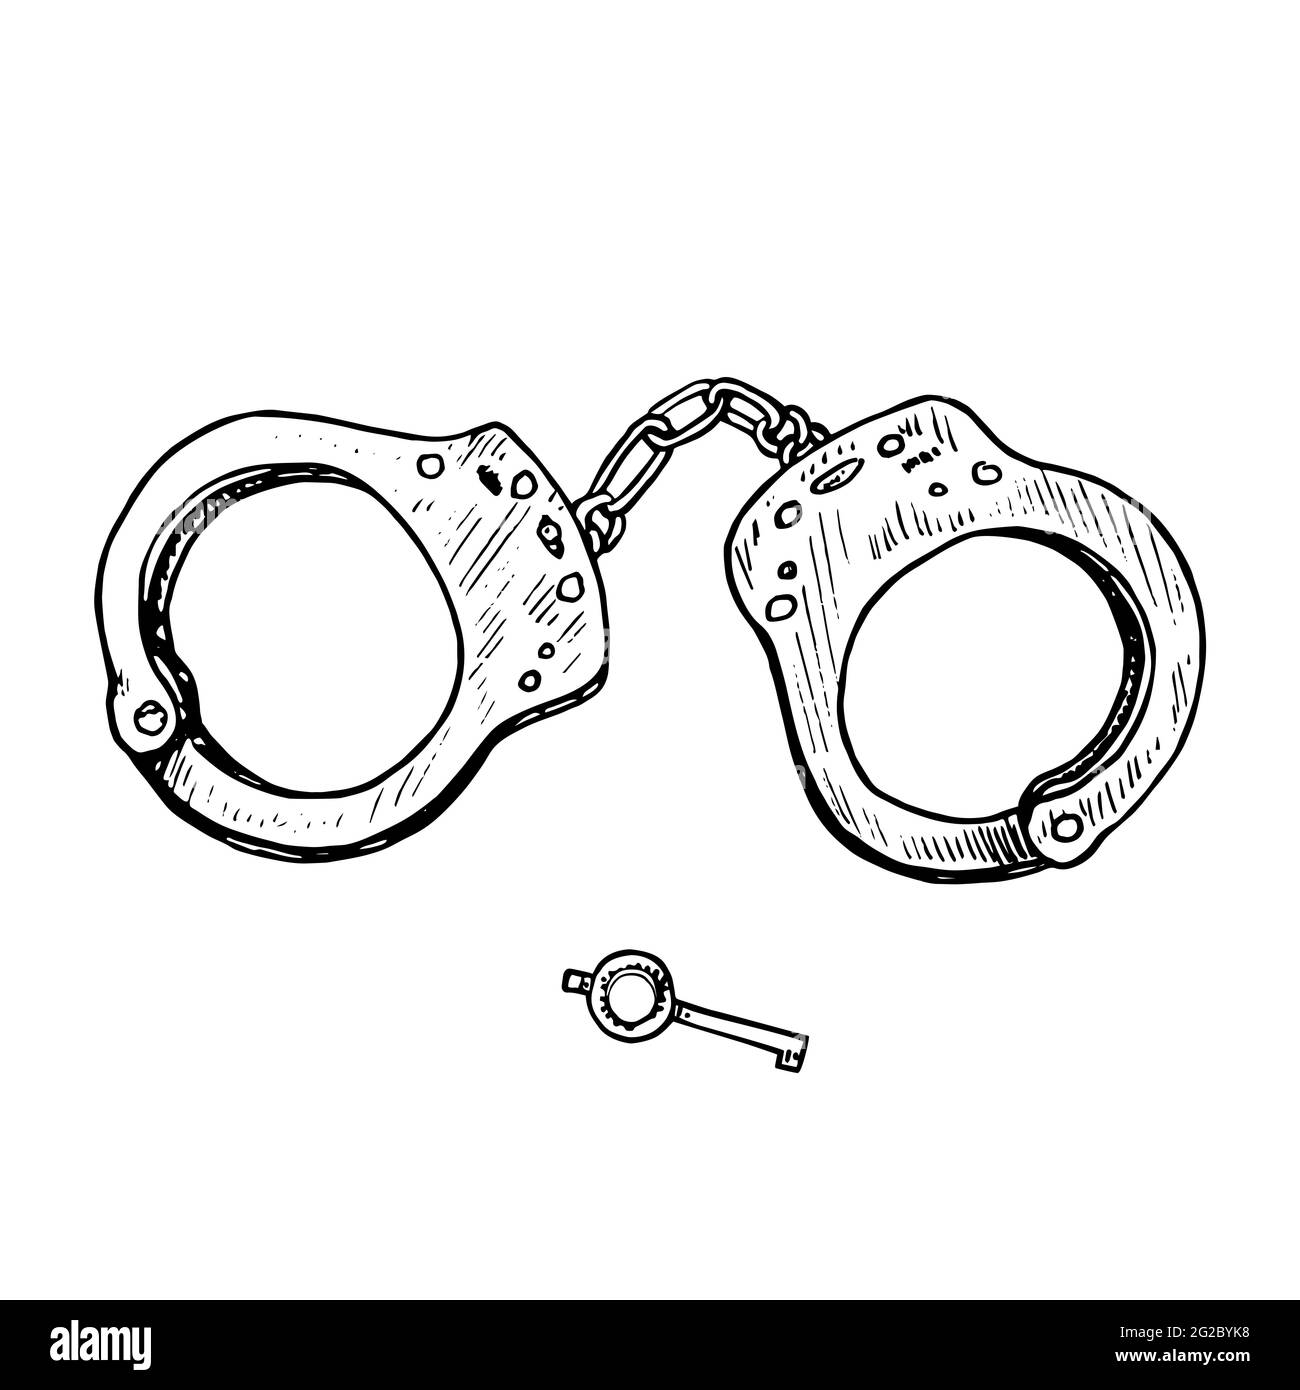 Handcuffs and key,  gravure style ink drawing illustration isolated on white Stock Photo